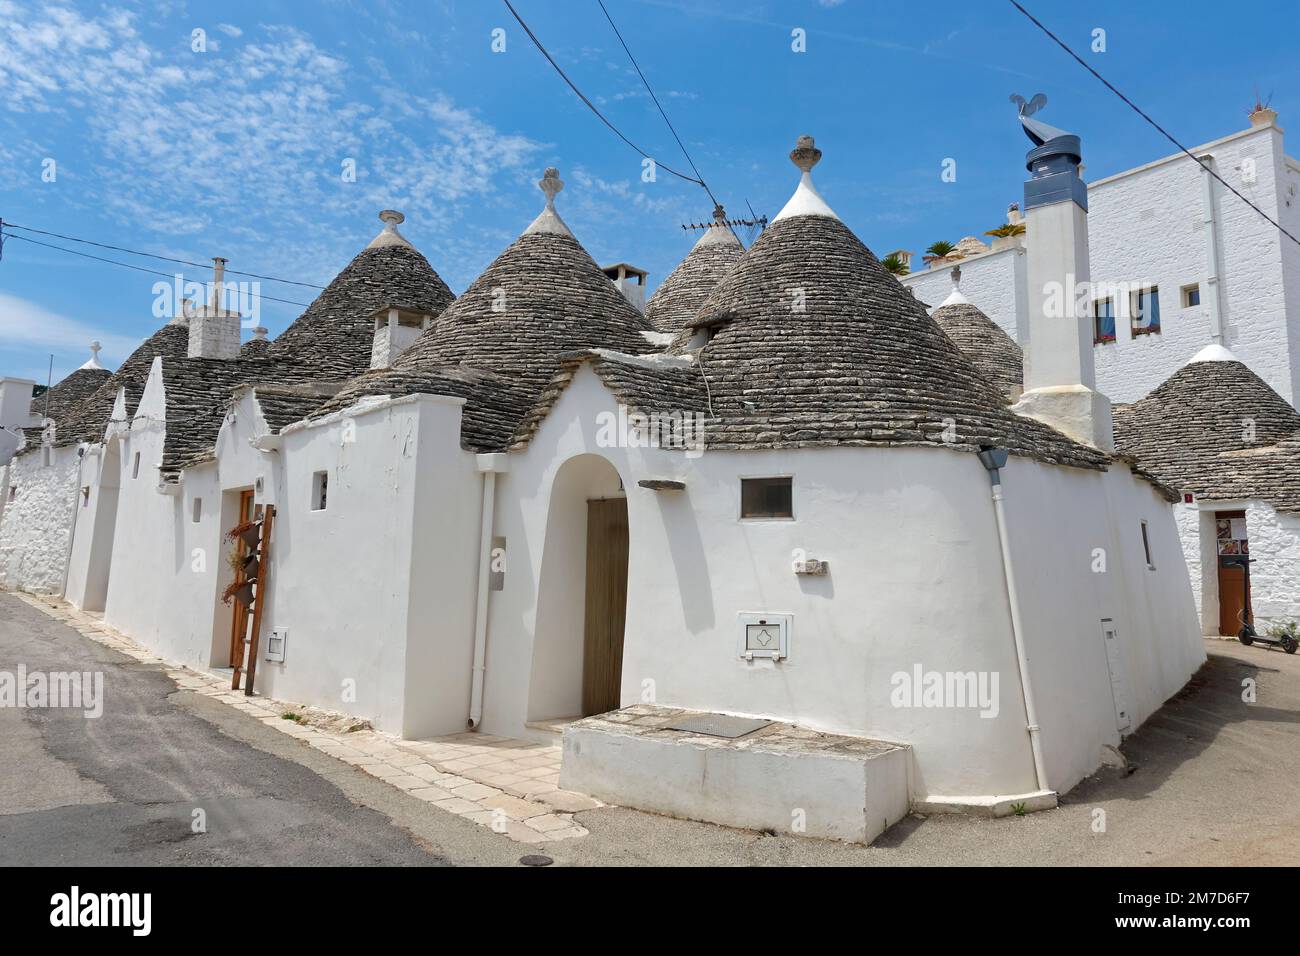 Trulli (traditional dry stone buildings with conical roofs) at Alberobello, Apulia (Puglia), Southern Italy. Stock Photo